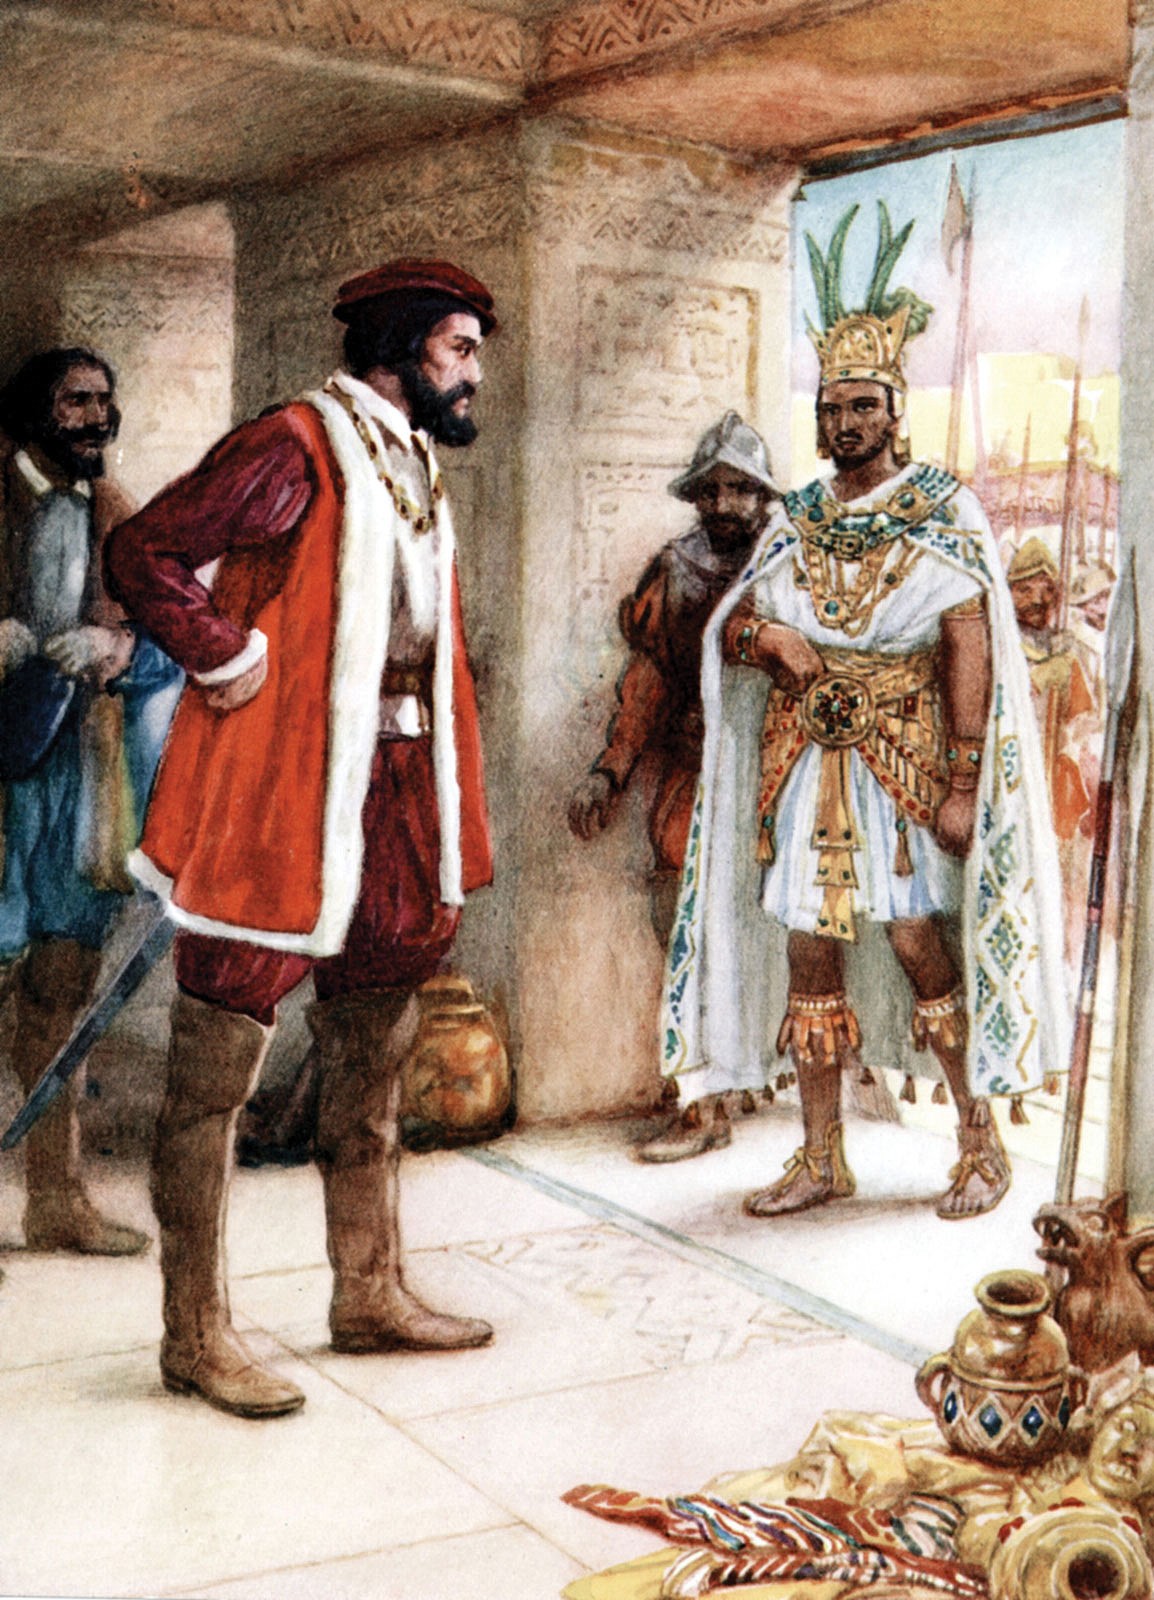 Aztec Emperor Montezuma presenting valuable gifts to Hernán Cortés, who imprisoned him two weeks later.